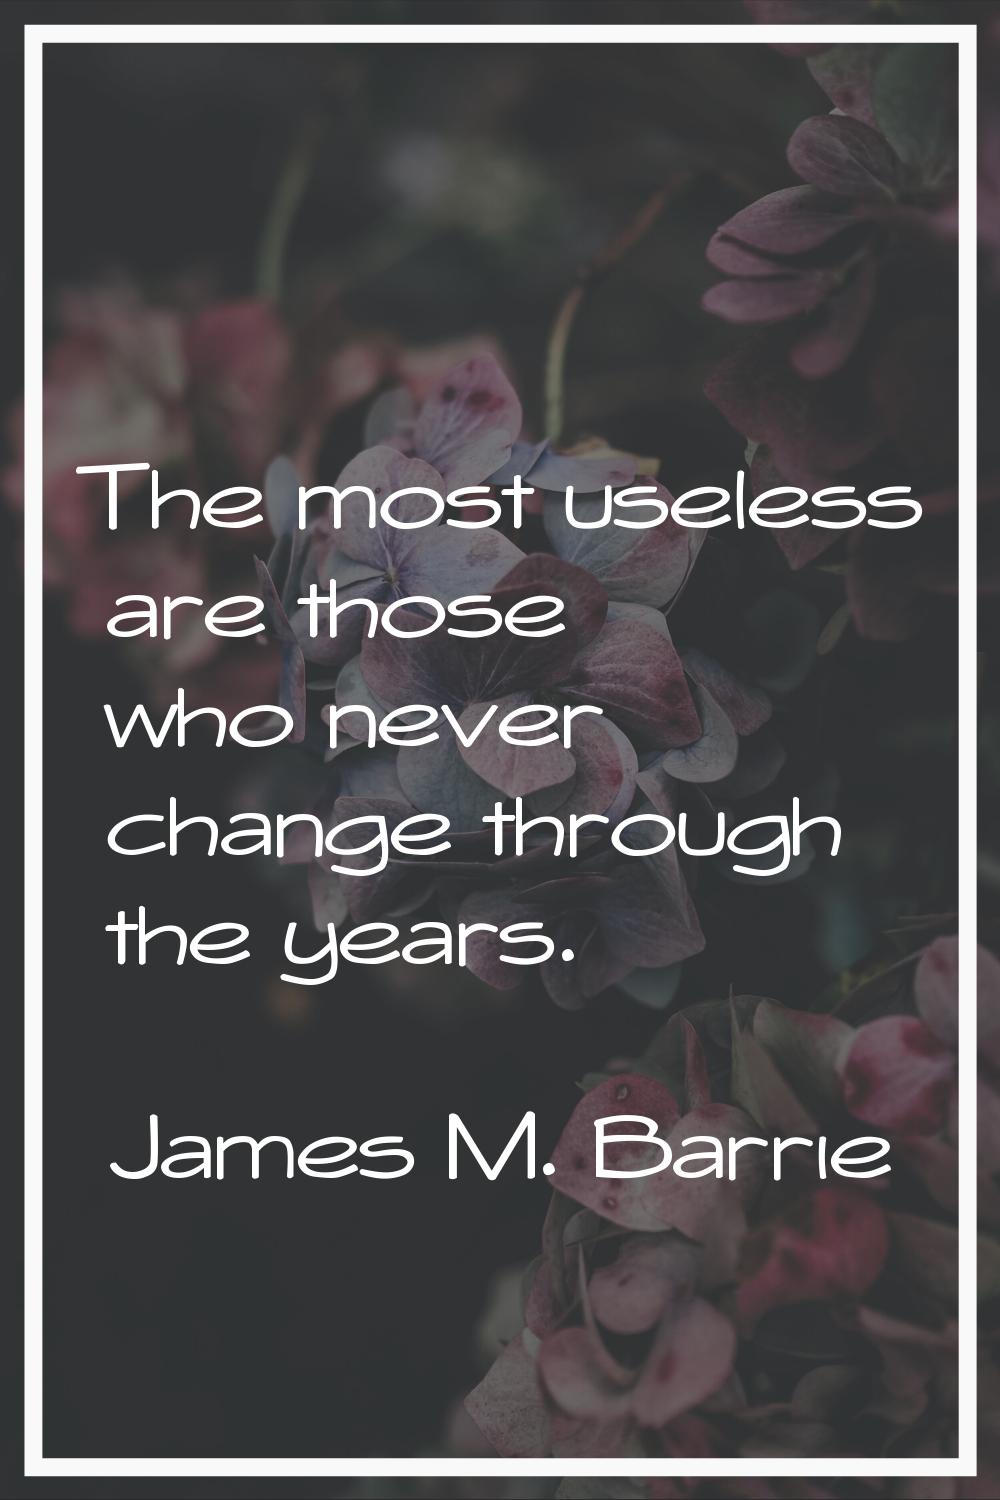 The most useless are those who never change through the years.